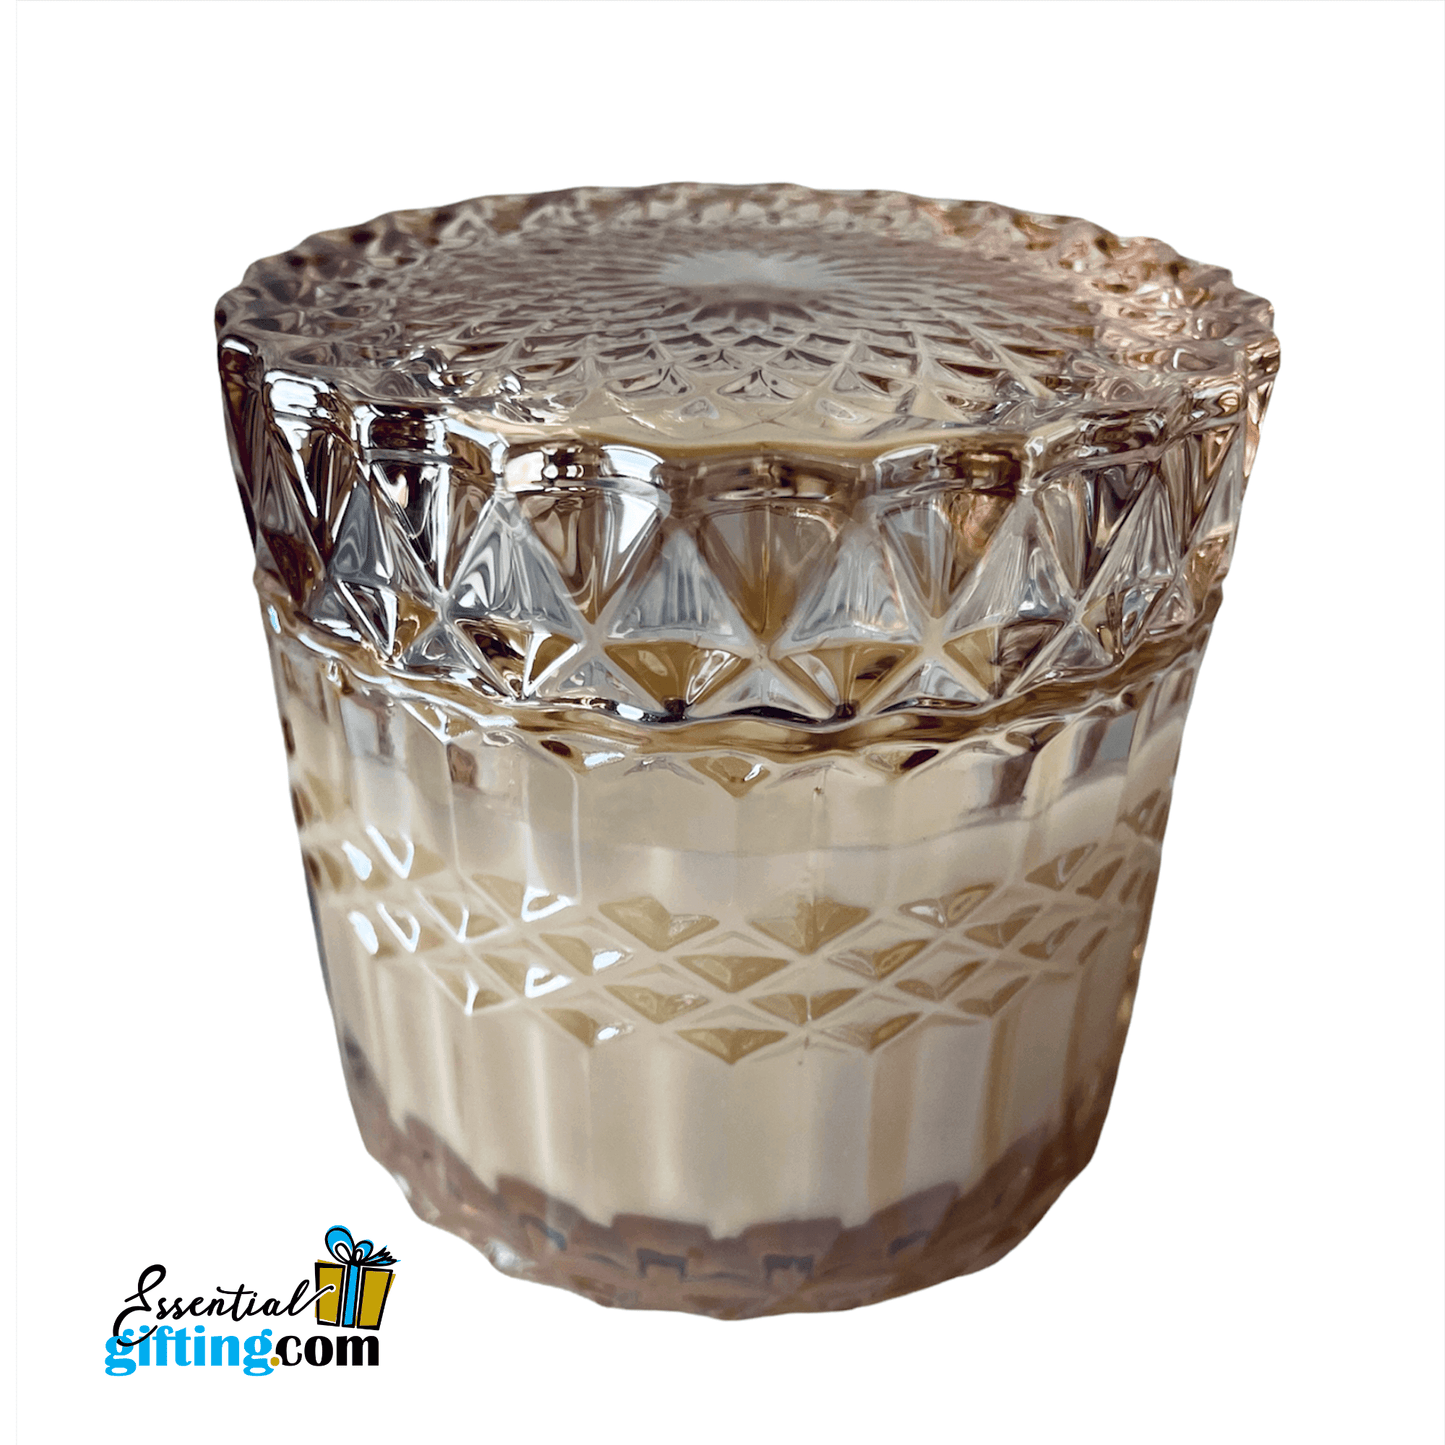 Alluring amber petite shimmer candle with intricate glass design.